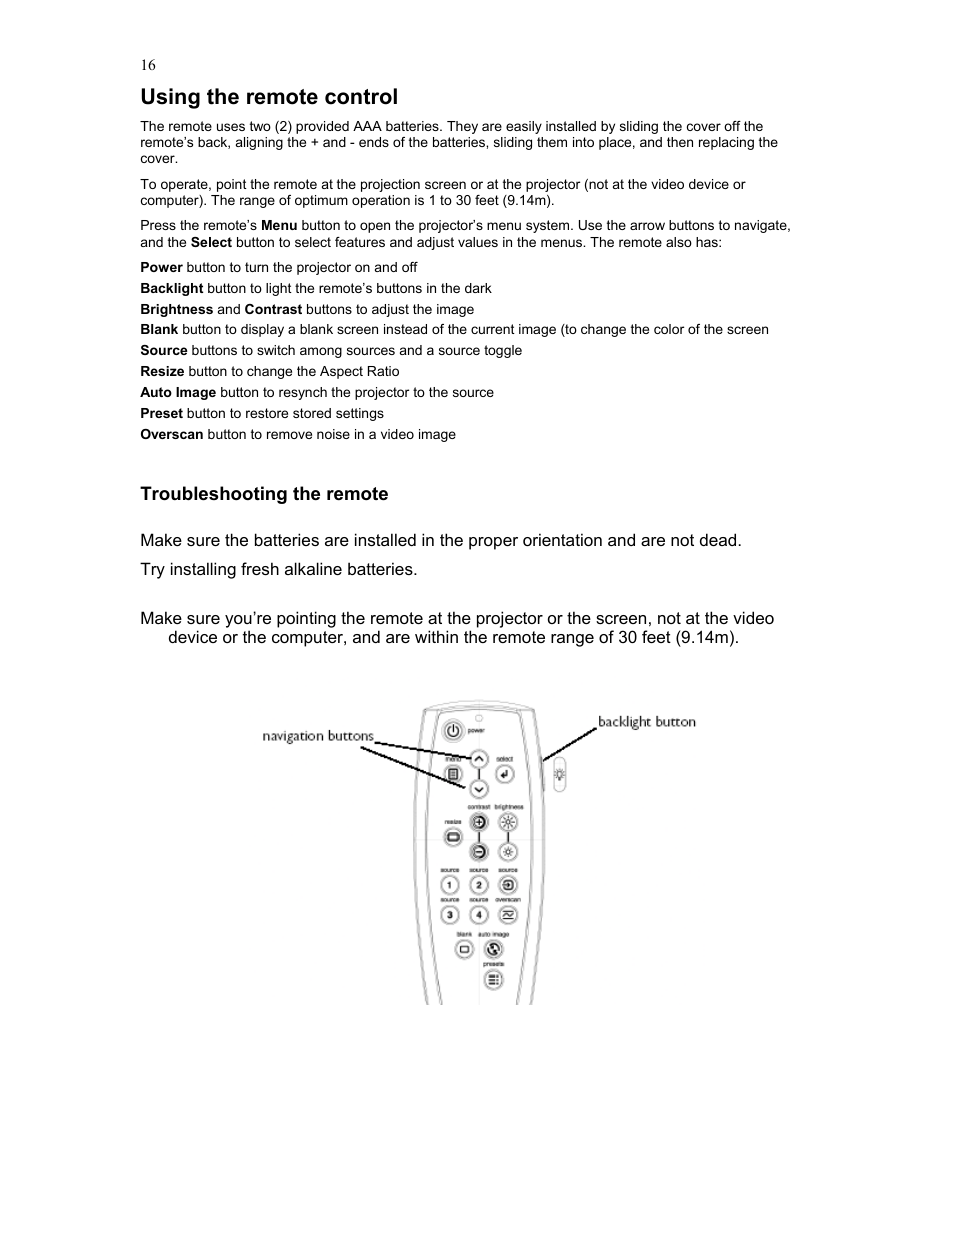 Using the remote control | Knoll Systems HD272 User Manual | Page 16 / 34